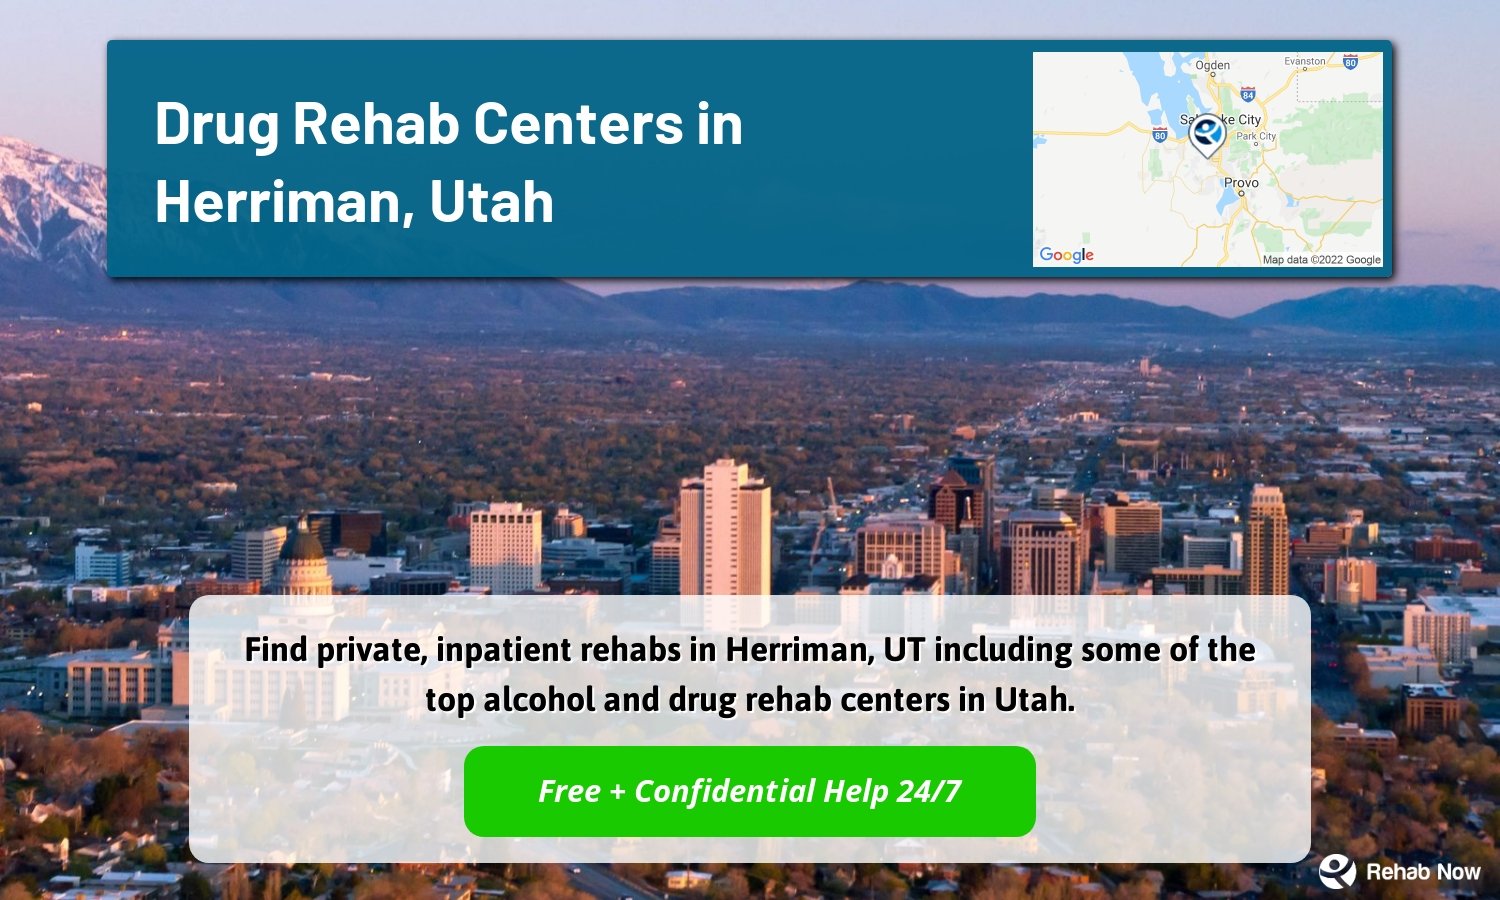 Find private, inpatient rehabs in Herriman, UT including some of the top alcohol and drug rehab centers in Utah.